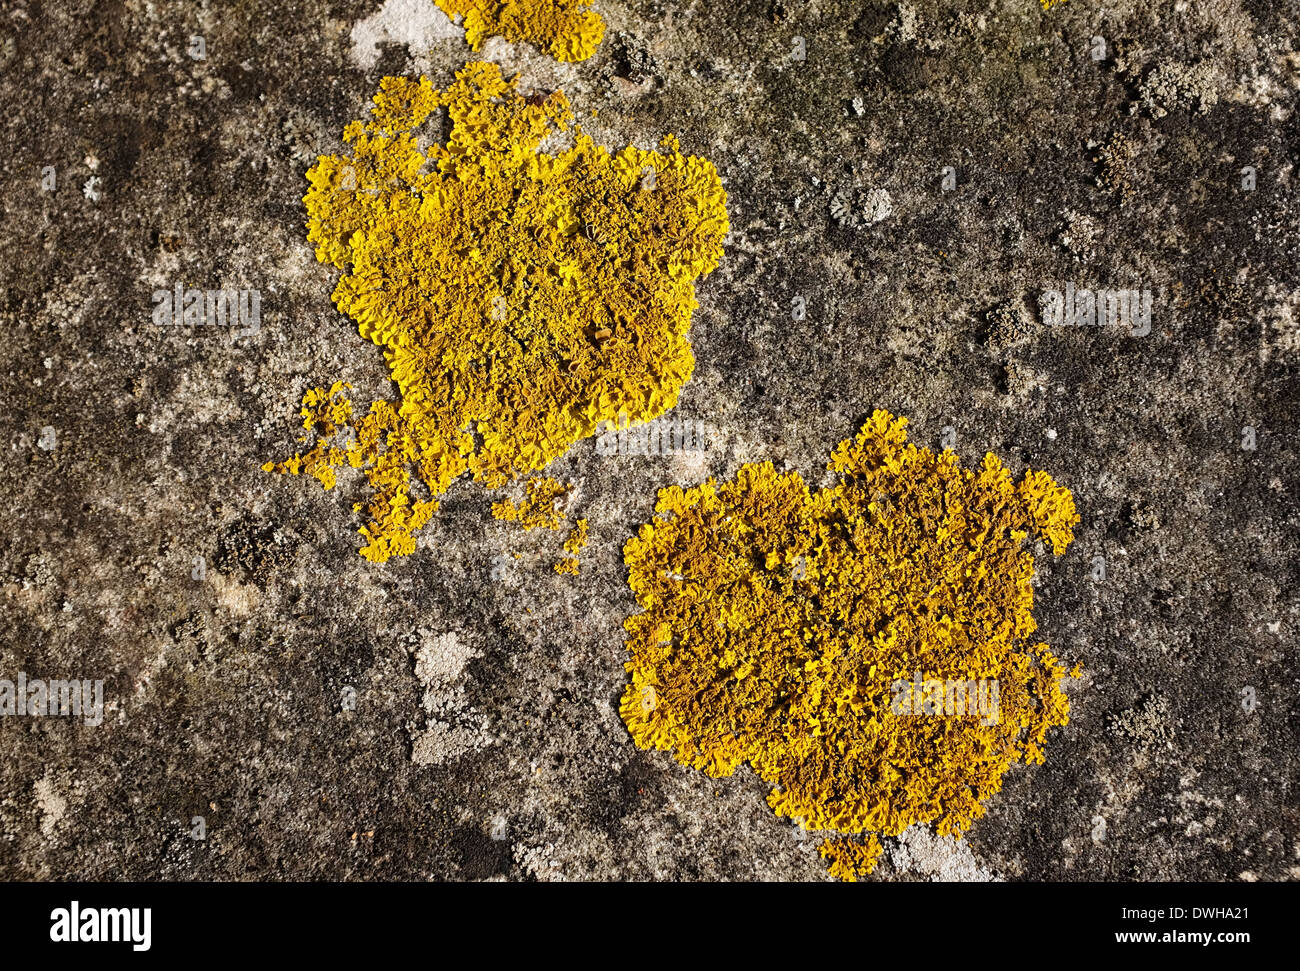 Closeup of two patches of yellow crustose lichen growing on concrete Stock Photo